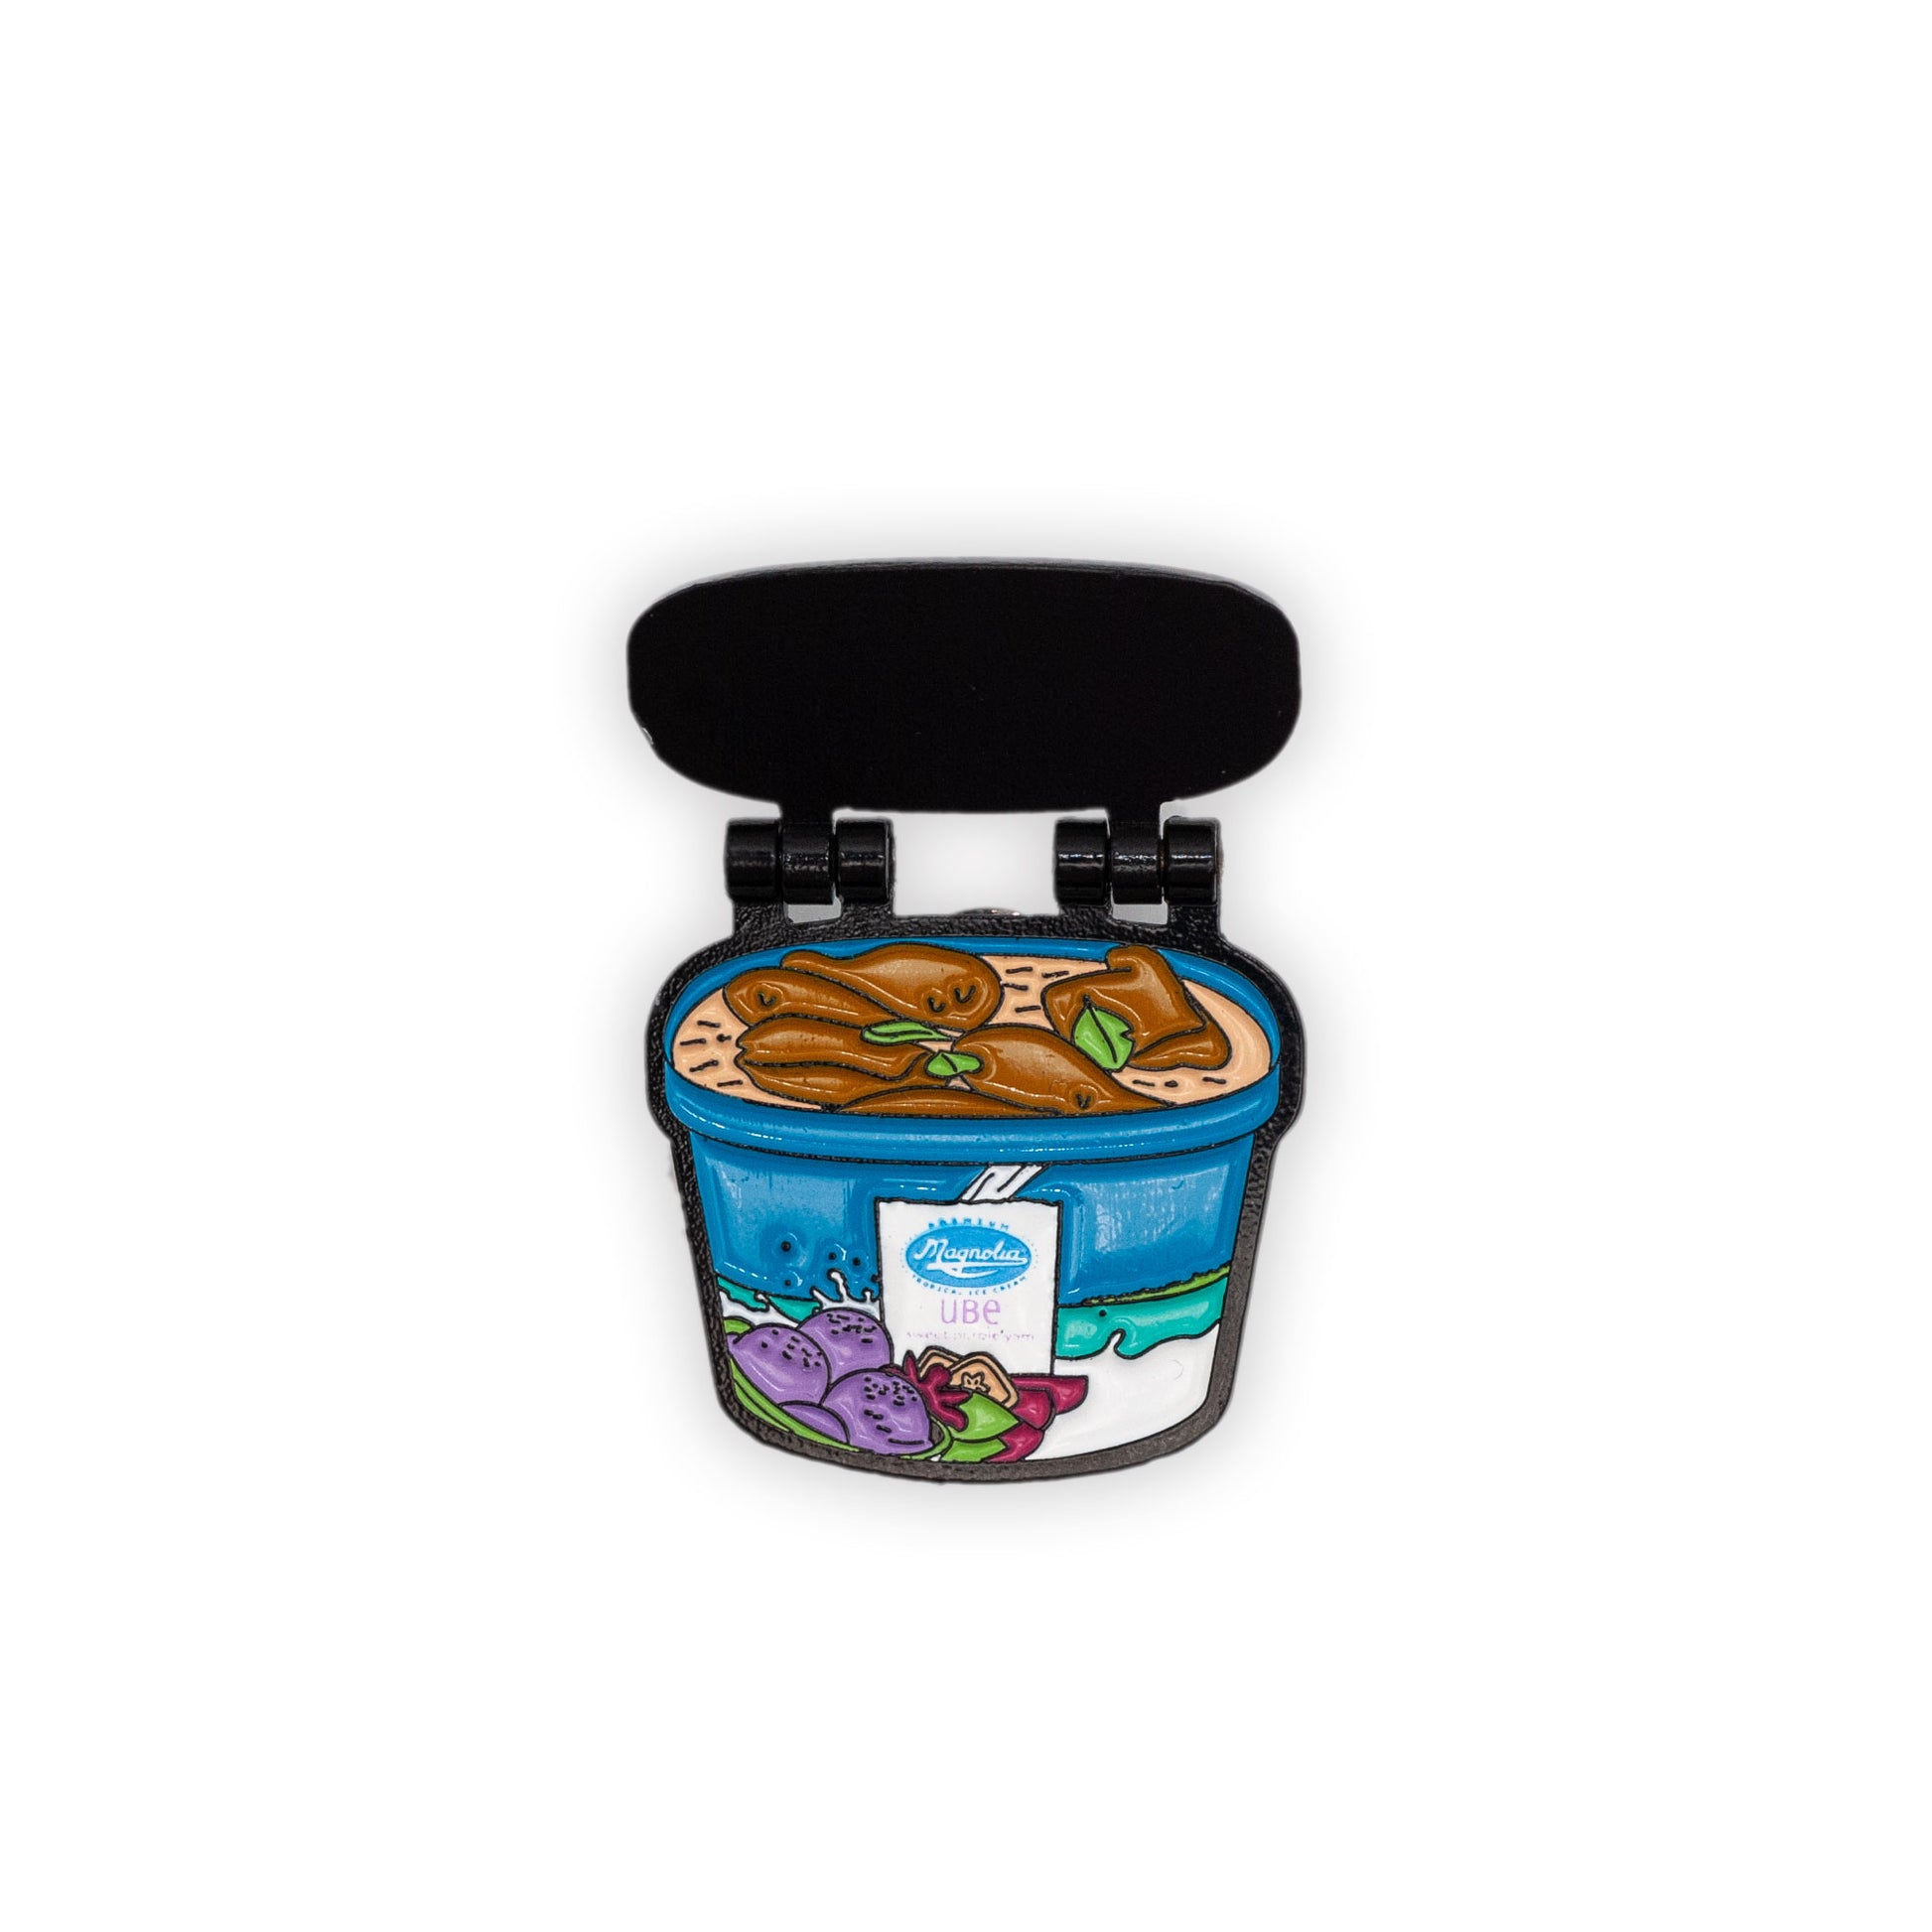 magnolia ice cream tub enamel pin that hinges open to reveal frozen chicken adobo. The ultimate Filipino Tupperware! Pin over white background.